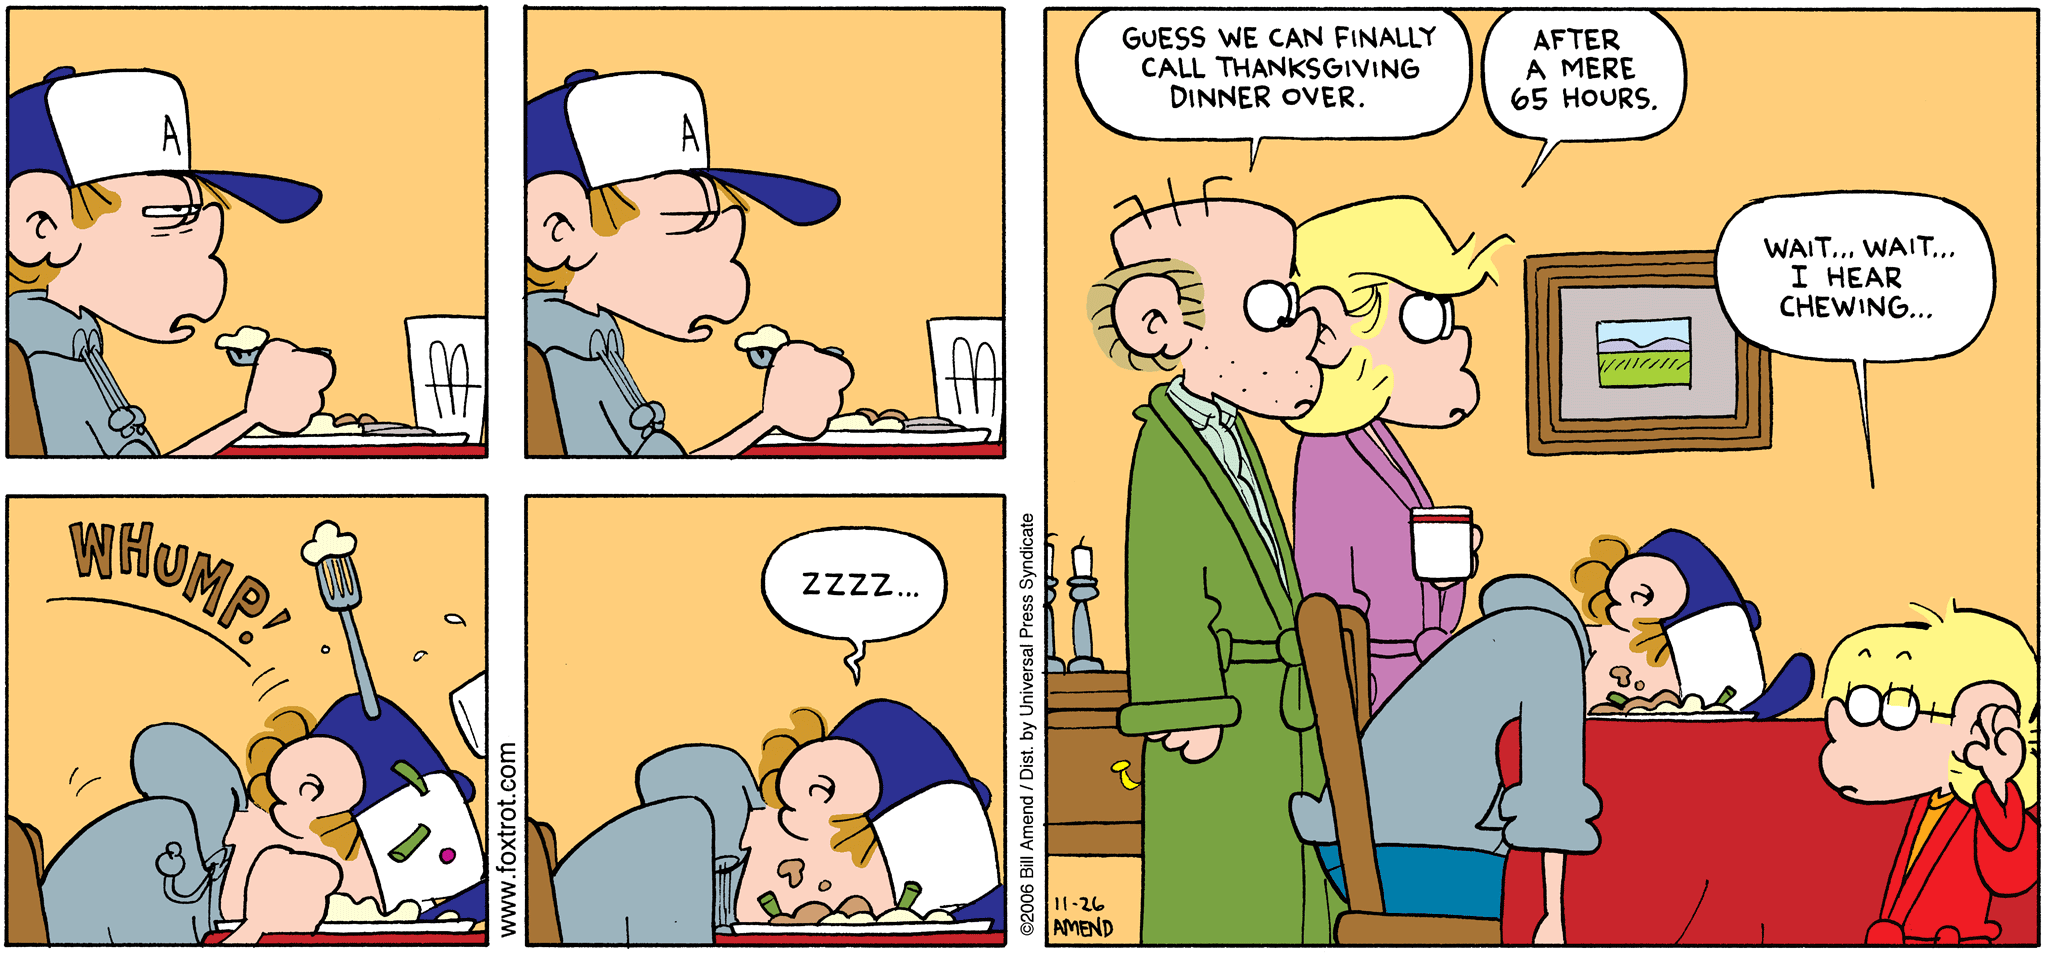 Thanksgiving Comics - FoxTrot comic strip by Bill Amend - Published November 26, 2006 - Transcript: Peter Fox: Zzzz... Roger Fox: Guess we can finally call Thanksgiving dinner over. Andy Fox: After a mere 65 hours. Jason Fox: Wait... wait... I hear chewing...